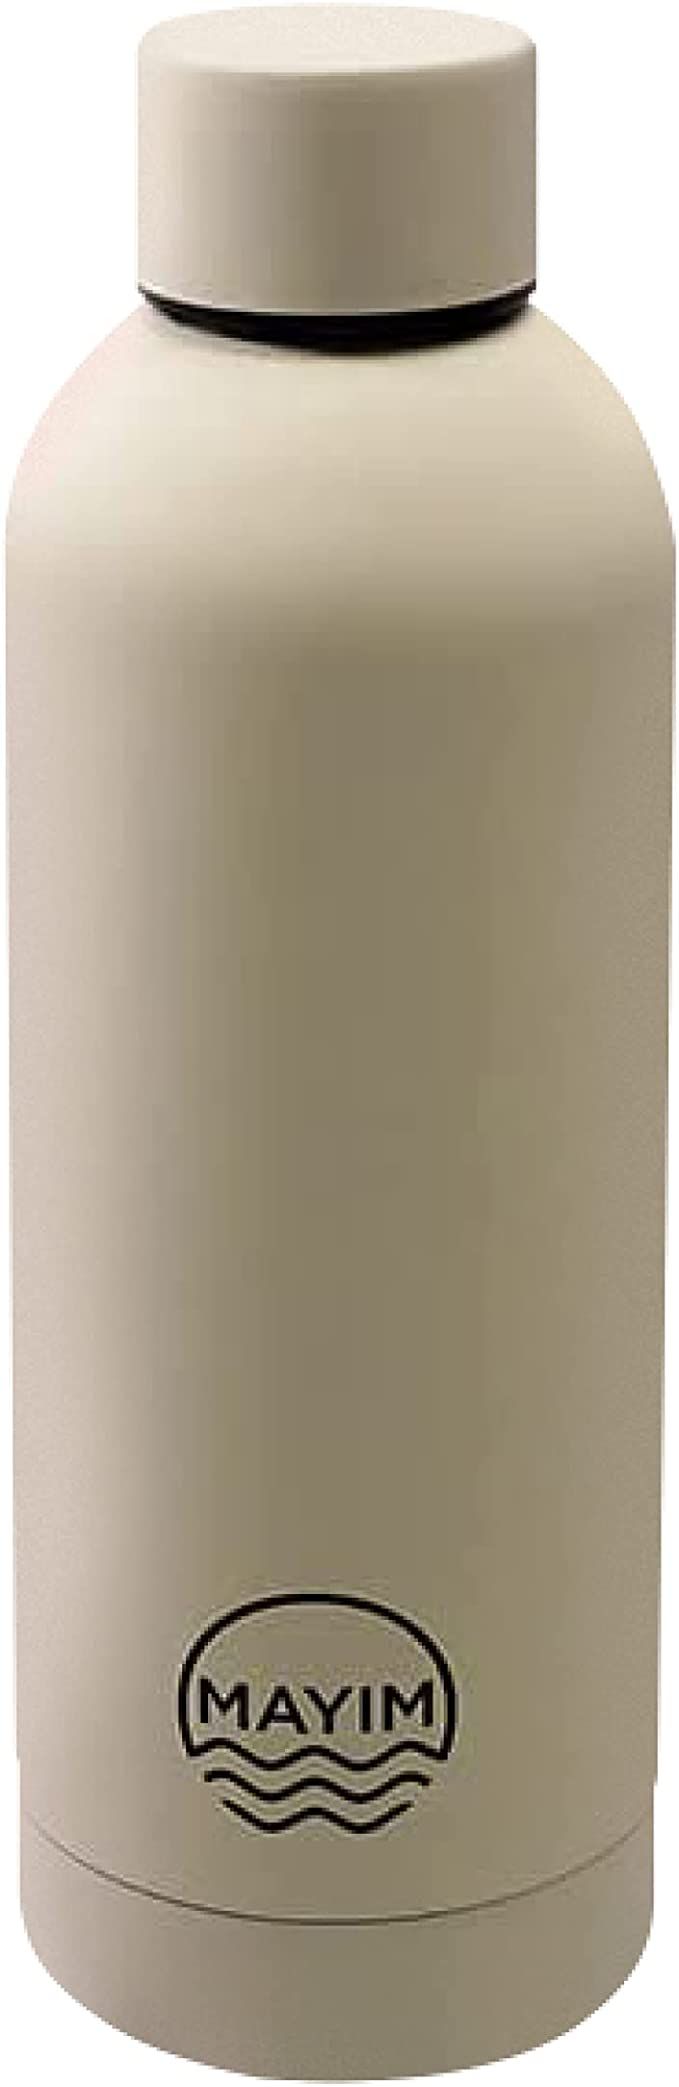 Mayim "The Bullet" Insulated Stainless Steel Water Bottle with Screw Top Lid- Vacuum Insulated Do... | Amazon (US)